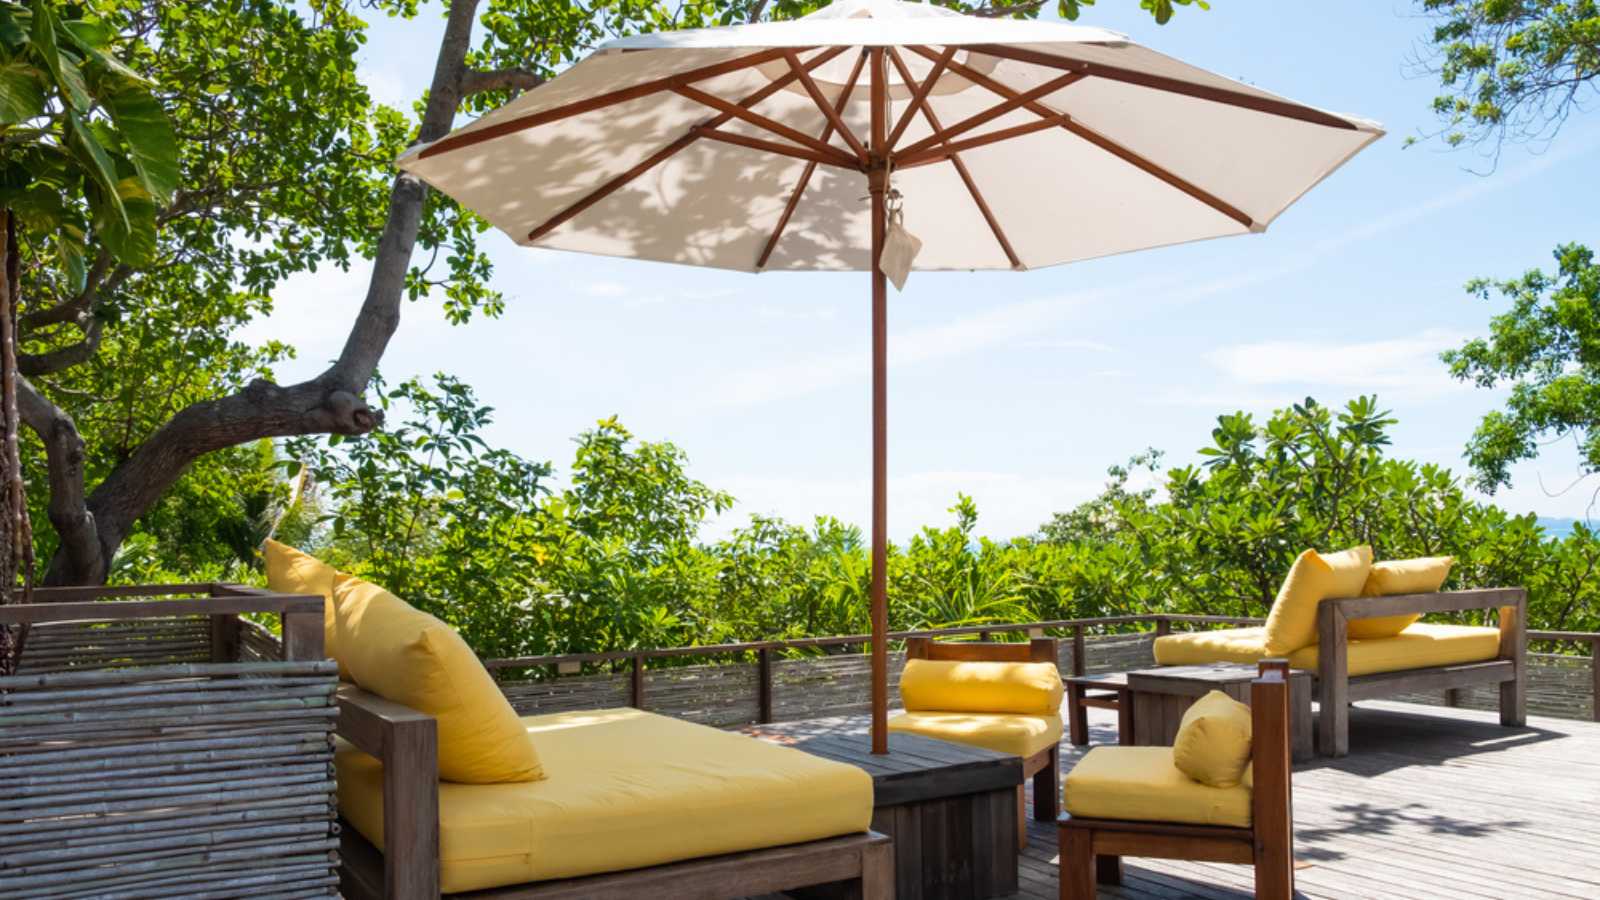 Wooden, yellow sofa couch with umbrella at the outdoor patio. With green tree and blue sky nature background.